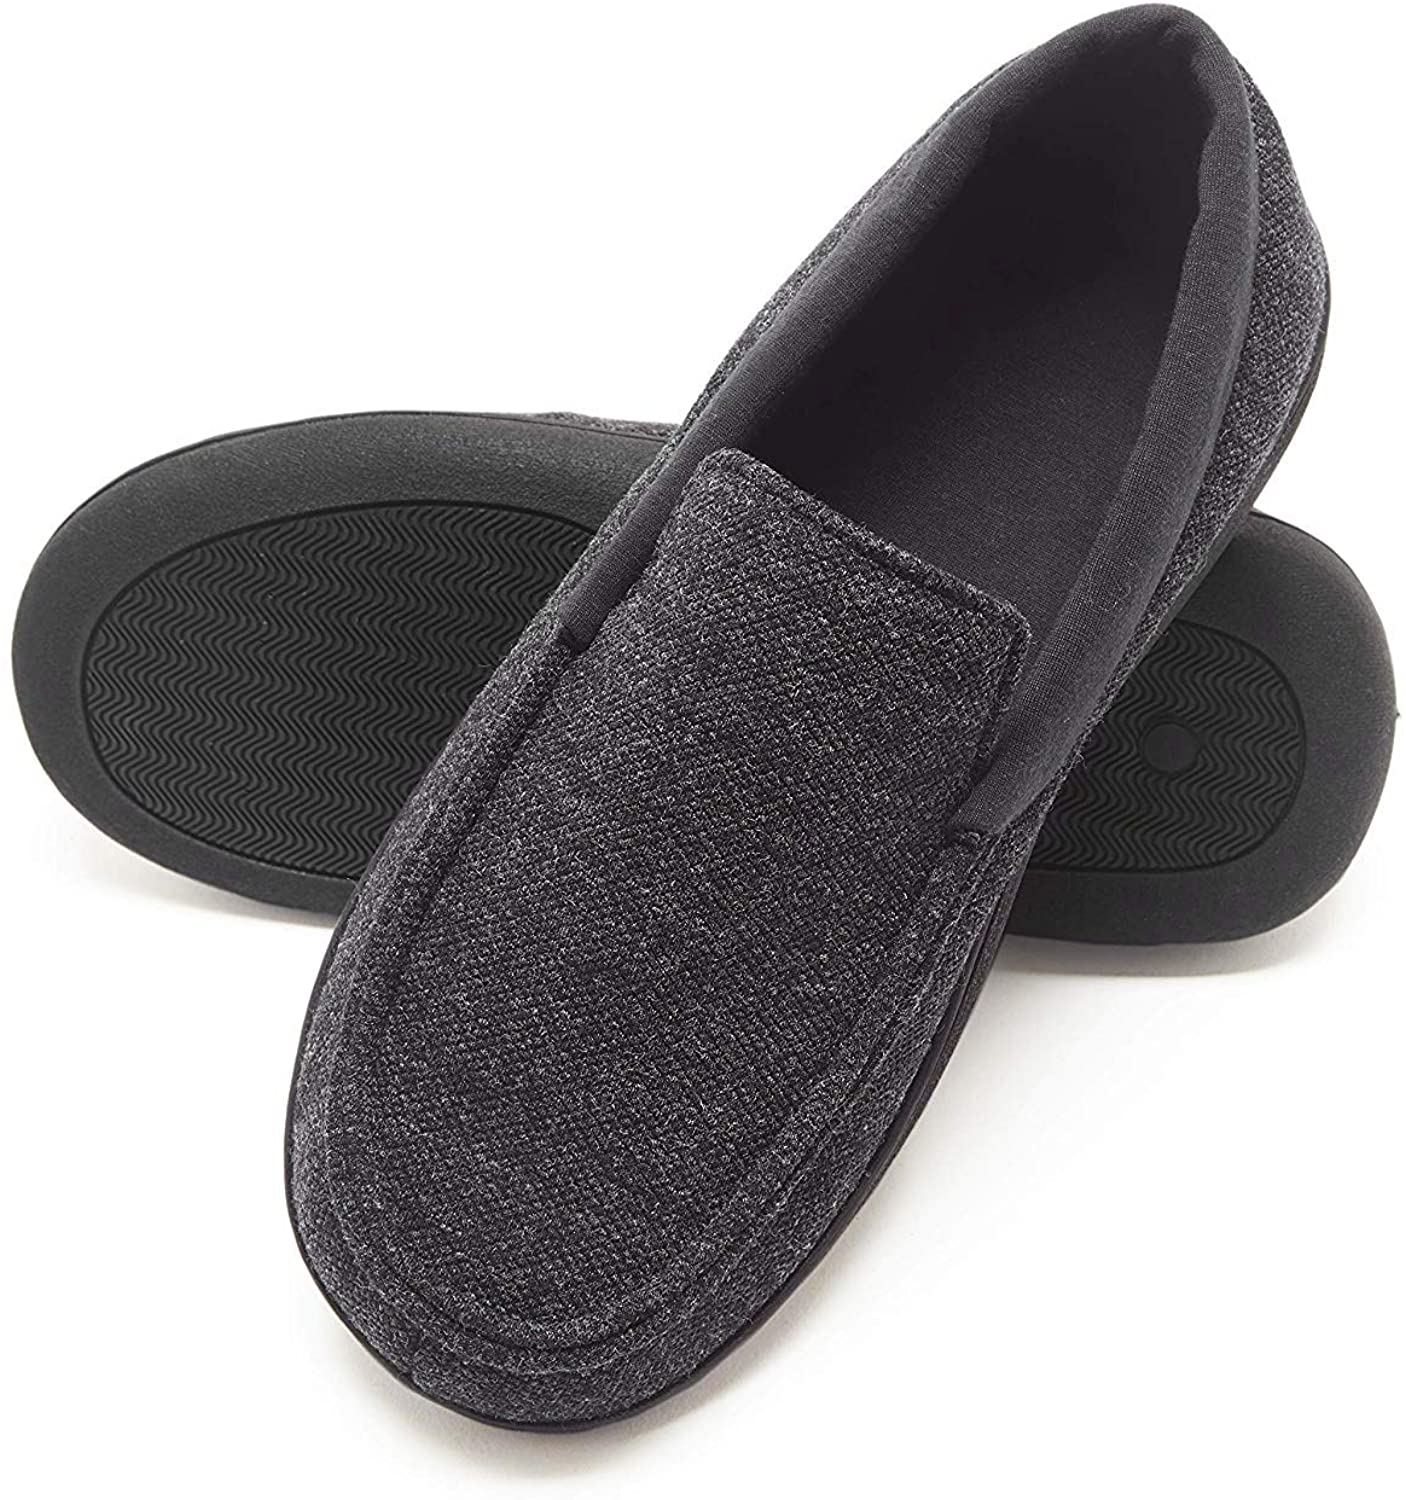 hanes men s slippers house shoes moccasin